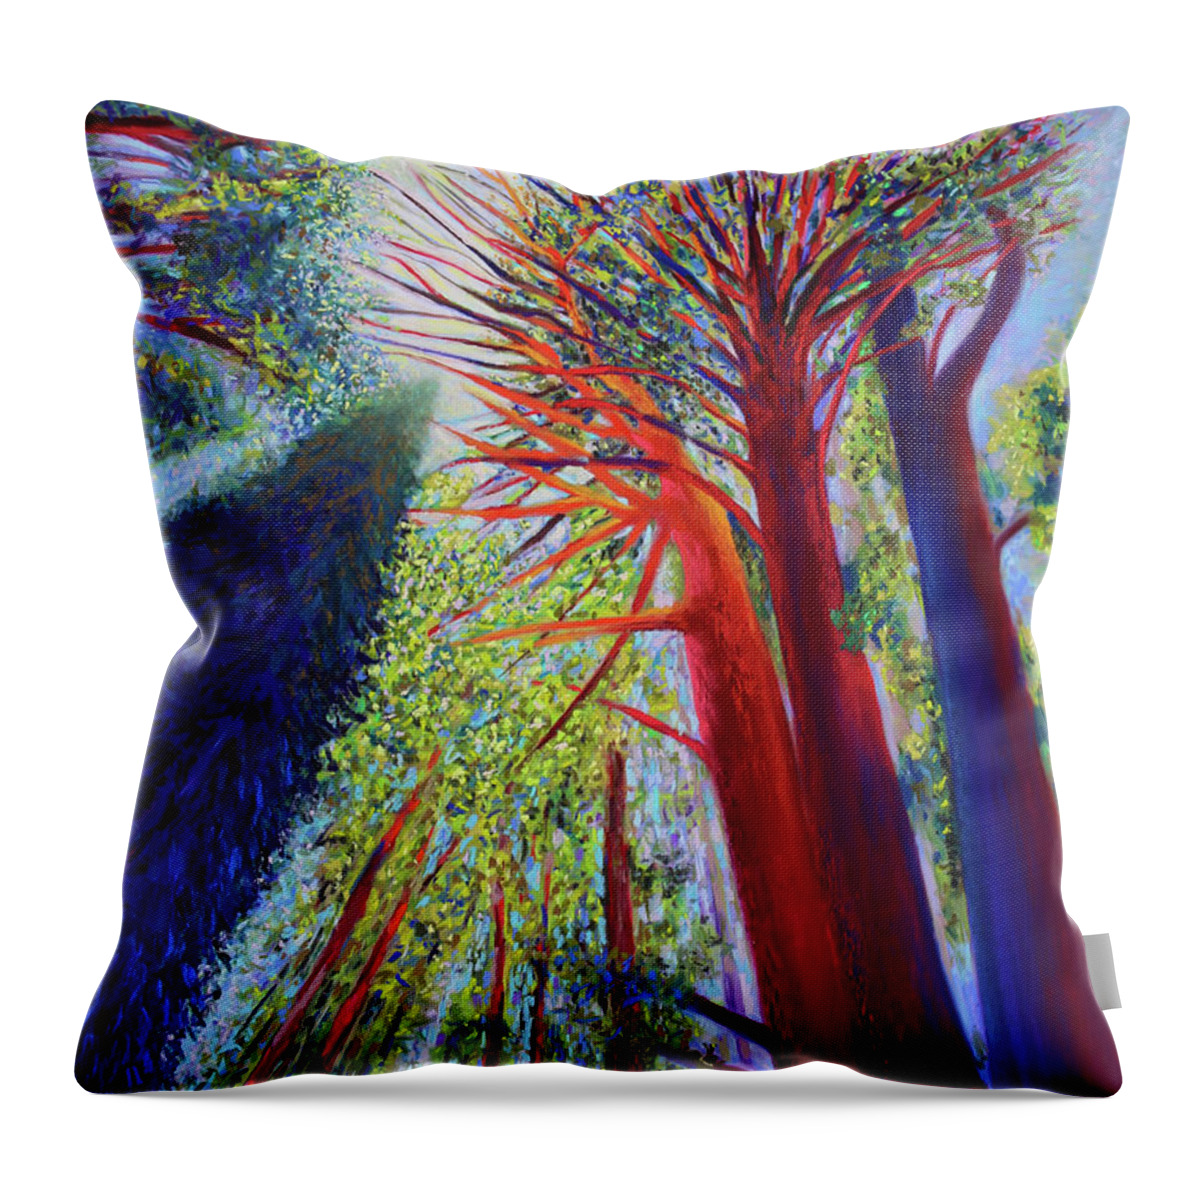  Throw Pillow featuring the painting Reaching for the Light by Polly Castor